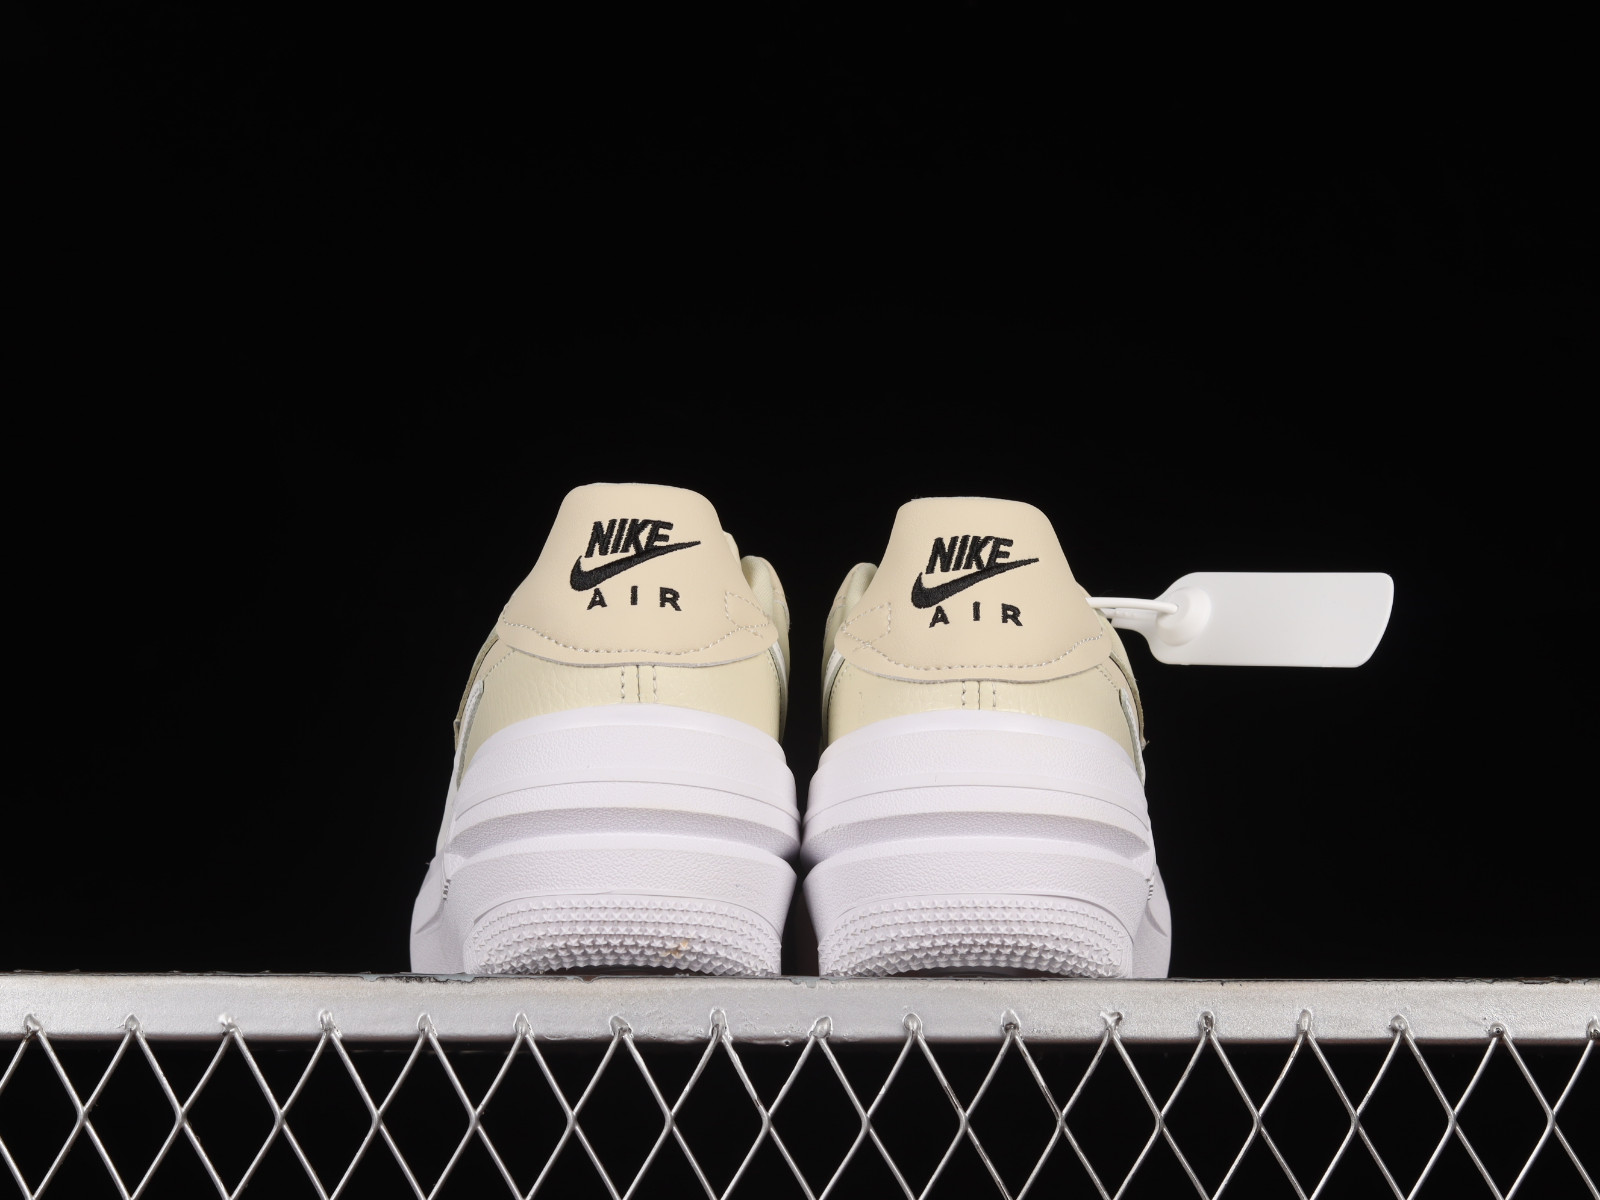 Nike Wmns Air Force 1 PLT.AF.ORM LV8 'White Metallic Silver' | Women's Size 5.5